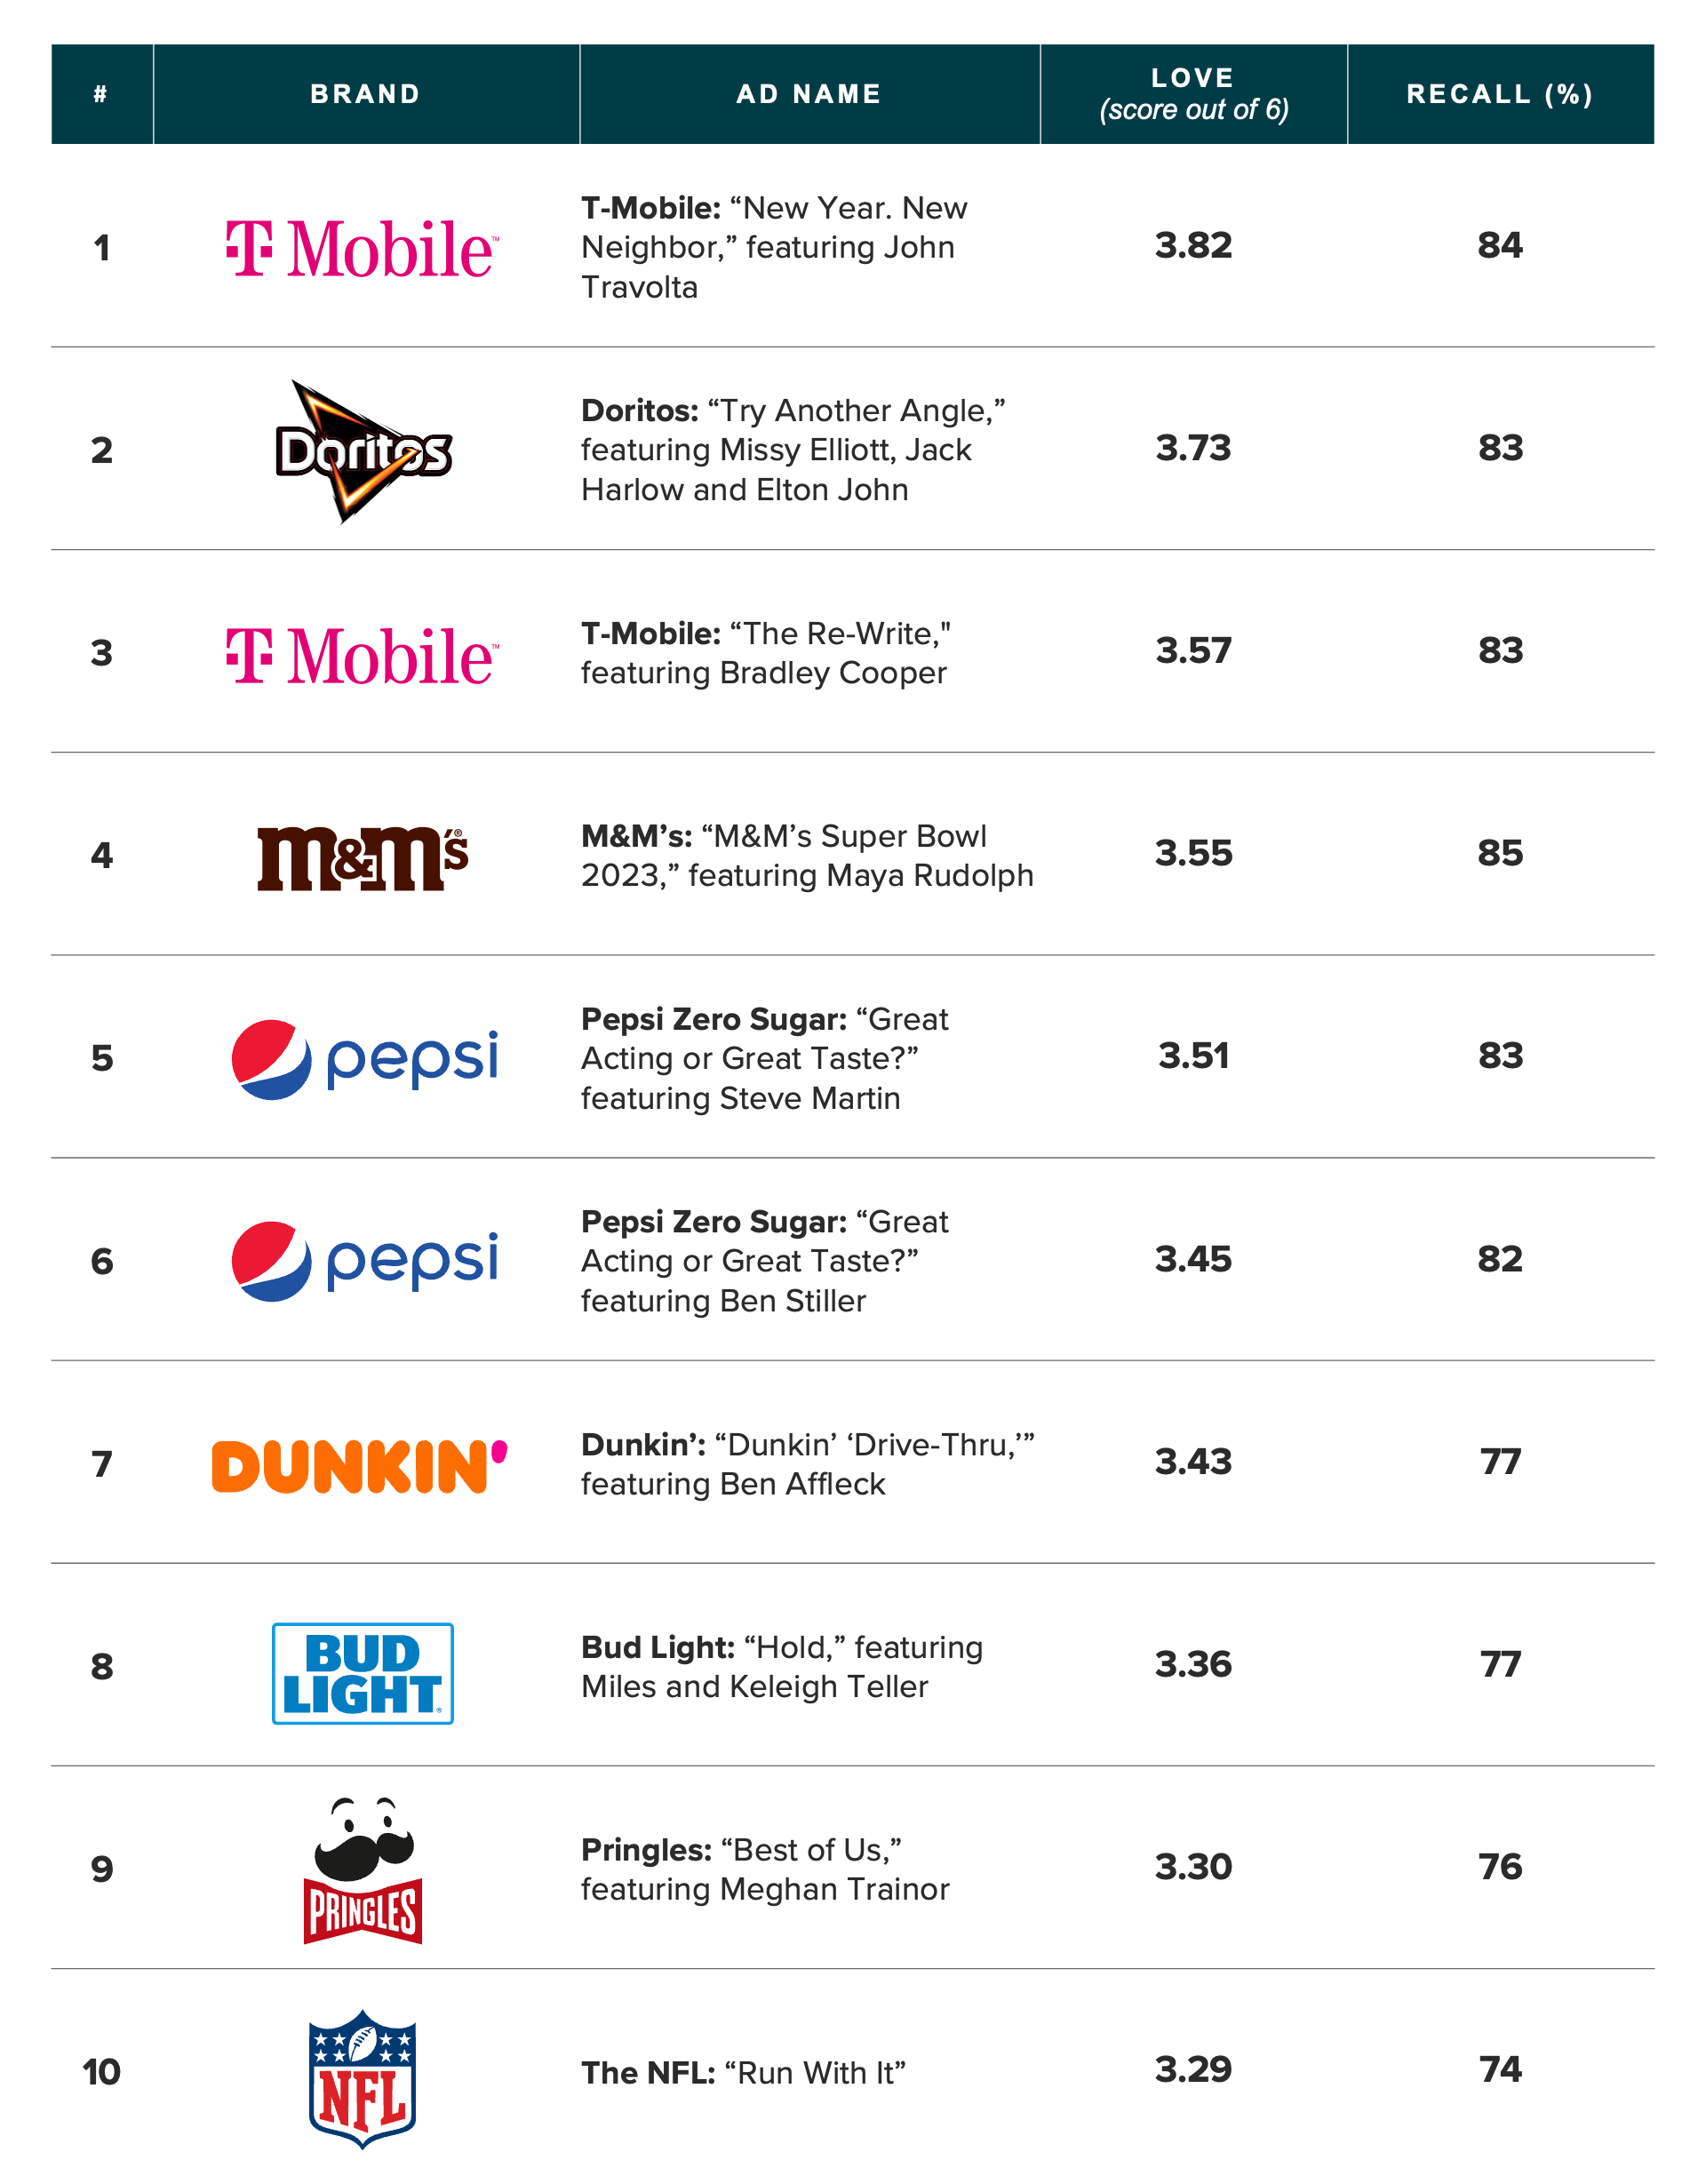 Table showing the most loved Super Bowl LVII ads, with T-Mobile's ad featuring John Travolta ranking up top.